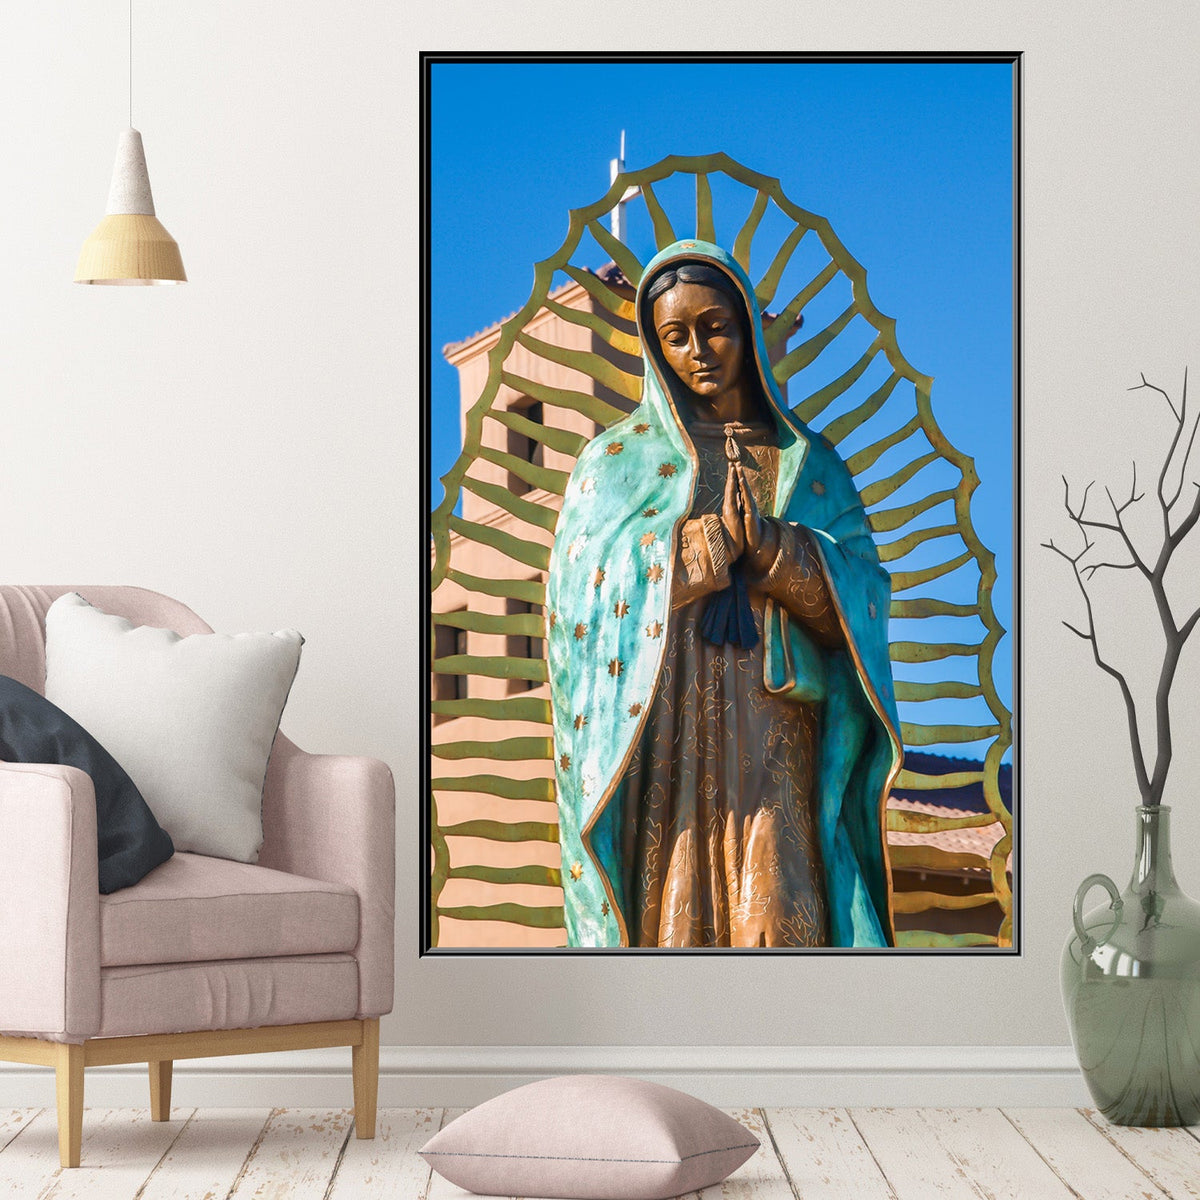 https://cdn.shopify.com/s/files/1/0387/9986/8044/products/OurBlessedLadyofGuadalupeCanvasArtprintFloatingFrame-2.jpg